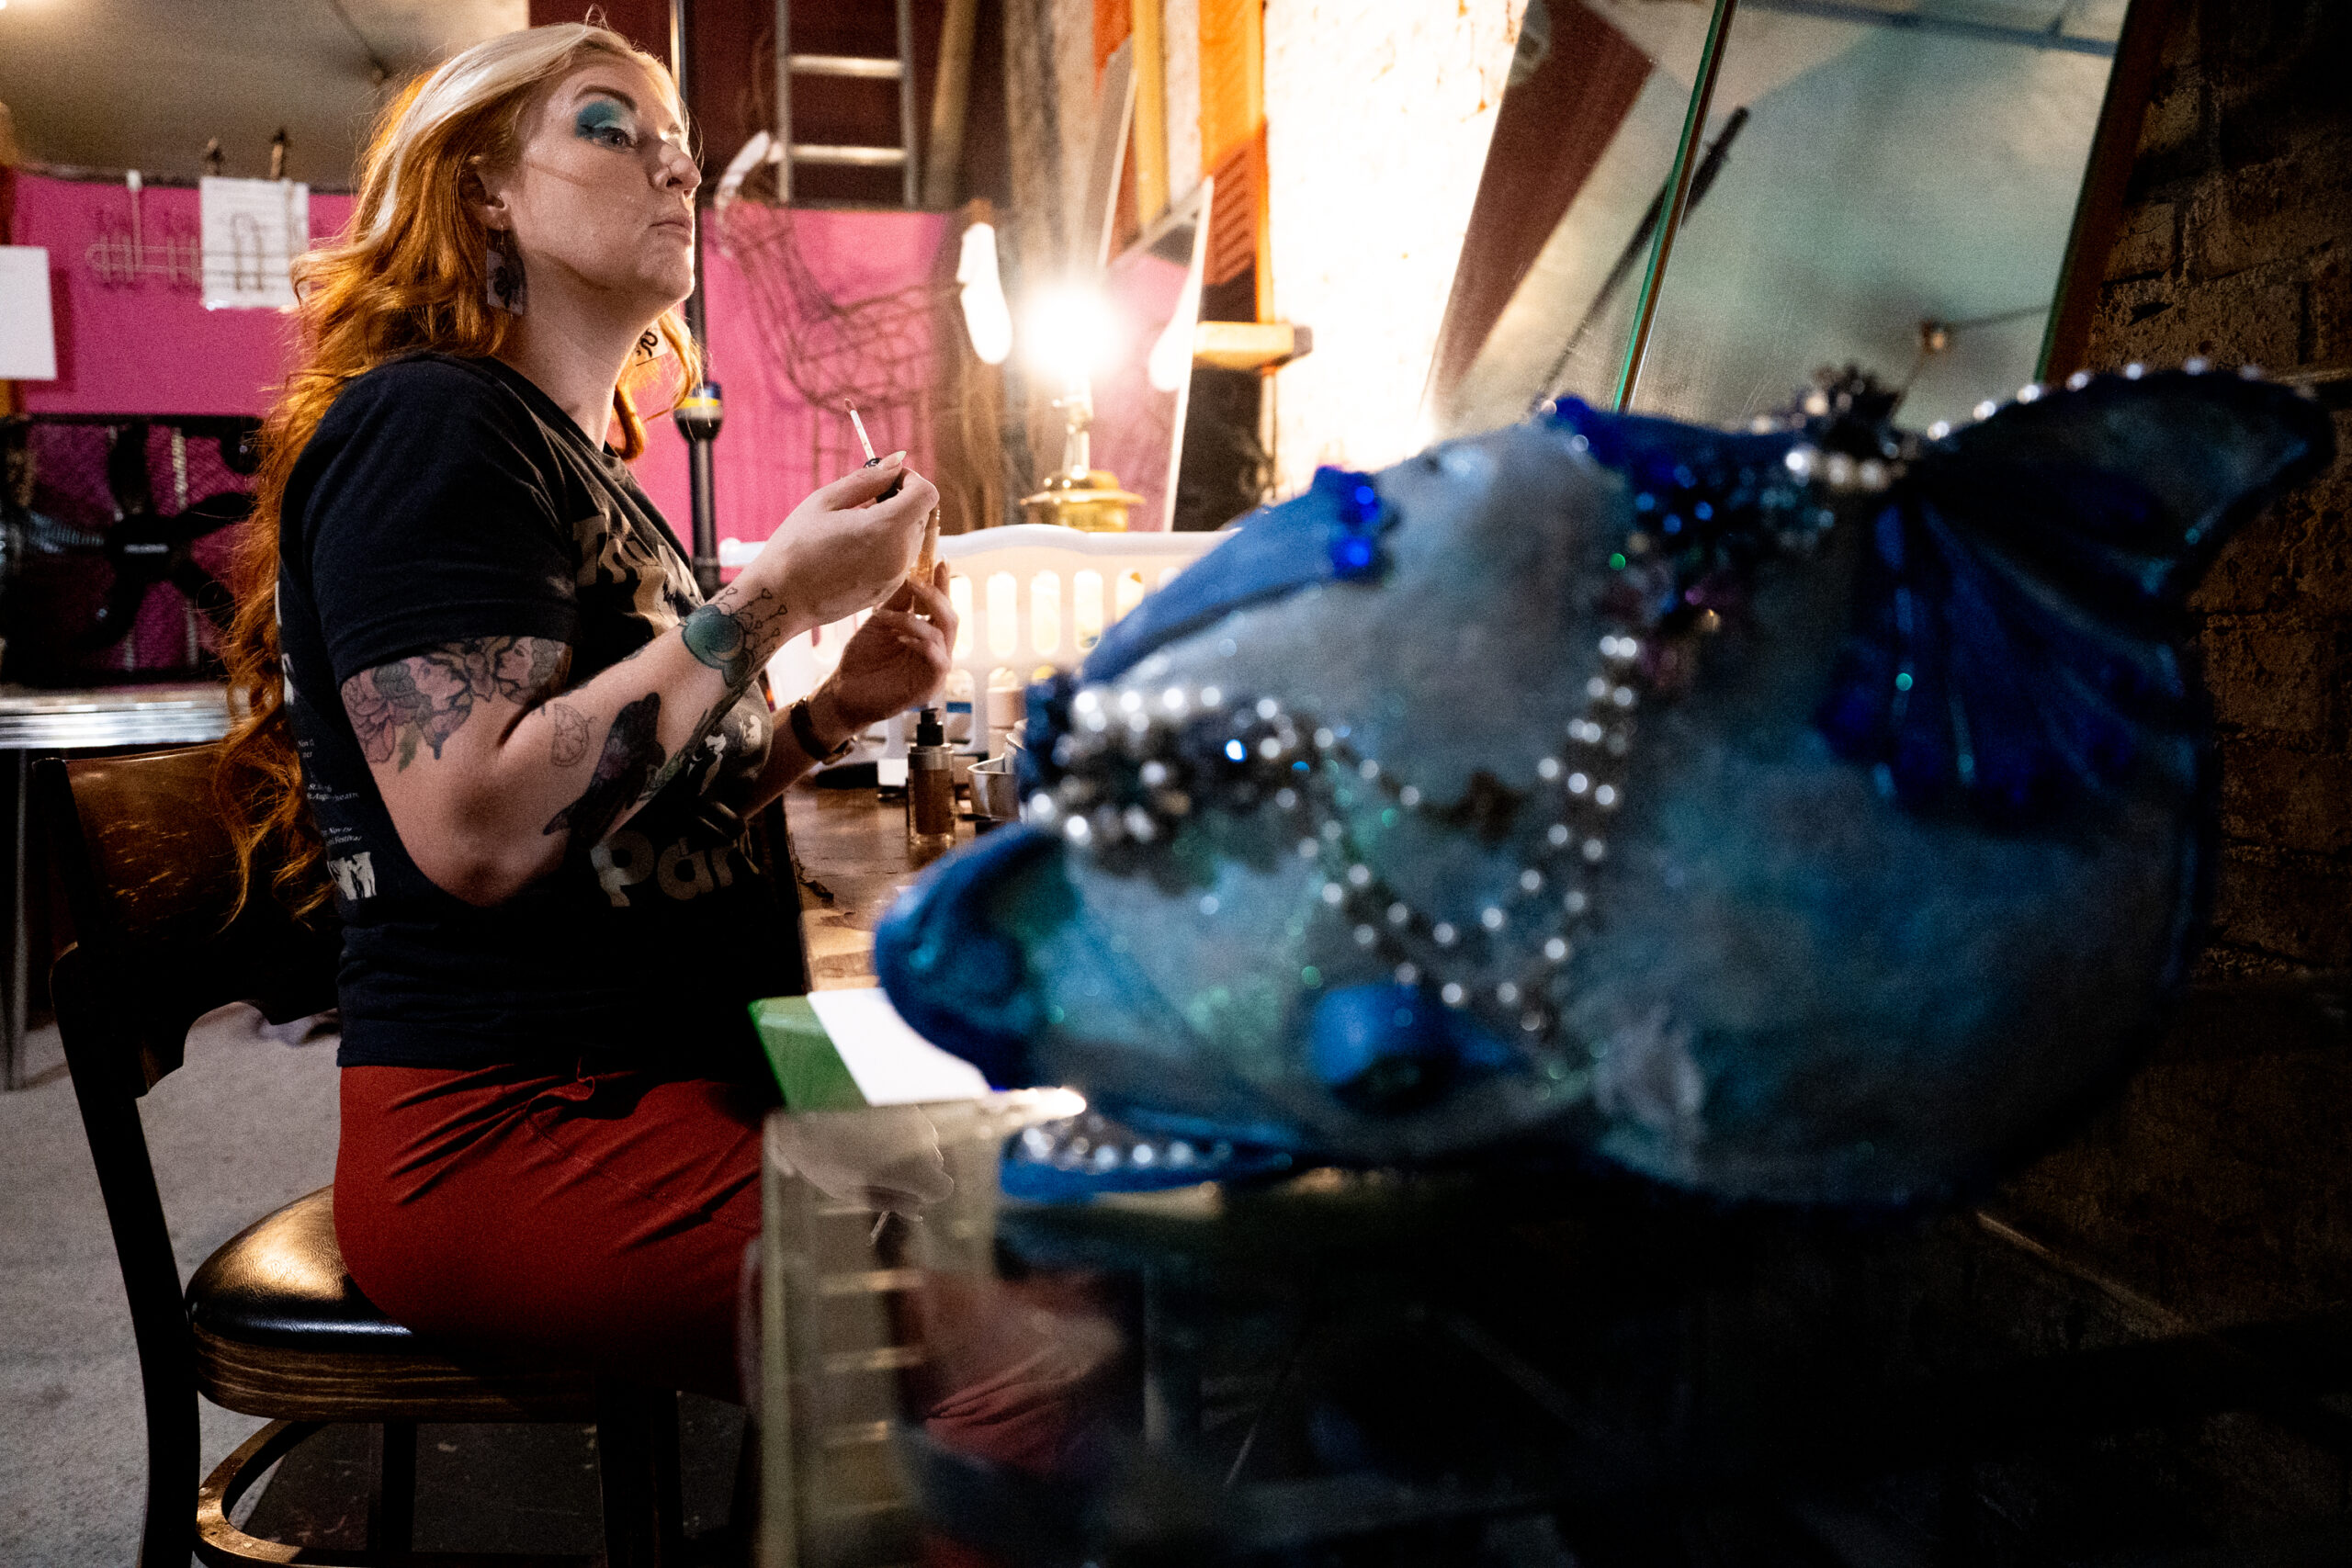 A white woman looks in the mirror putting on make-up in a dimly lit, makeshift dressing room. A closeup of a dolphin head is in the foreground.